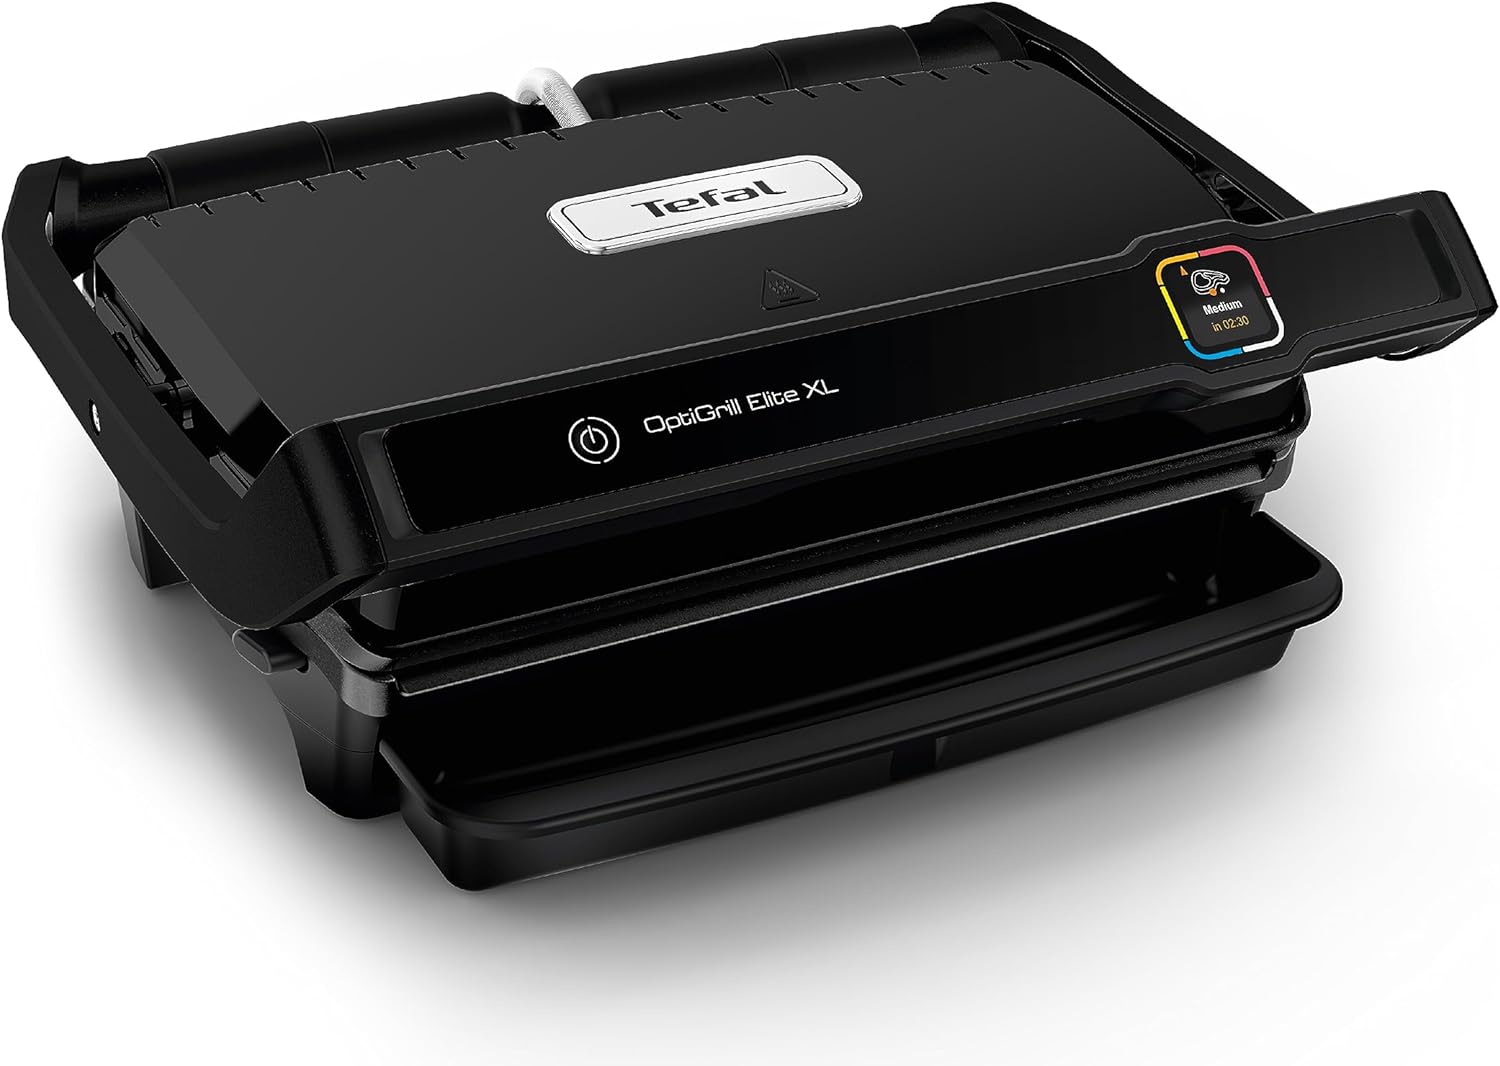 Tefal OptiGrill Elite XL Contact Grill, 16 Programmes, Digital Display with Cooking Level Display, Removable XL Plates, Electric Grill, Black, GC760812